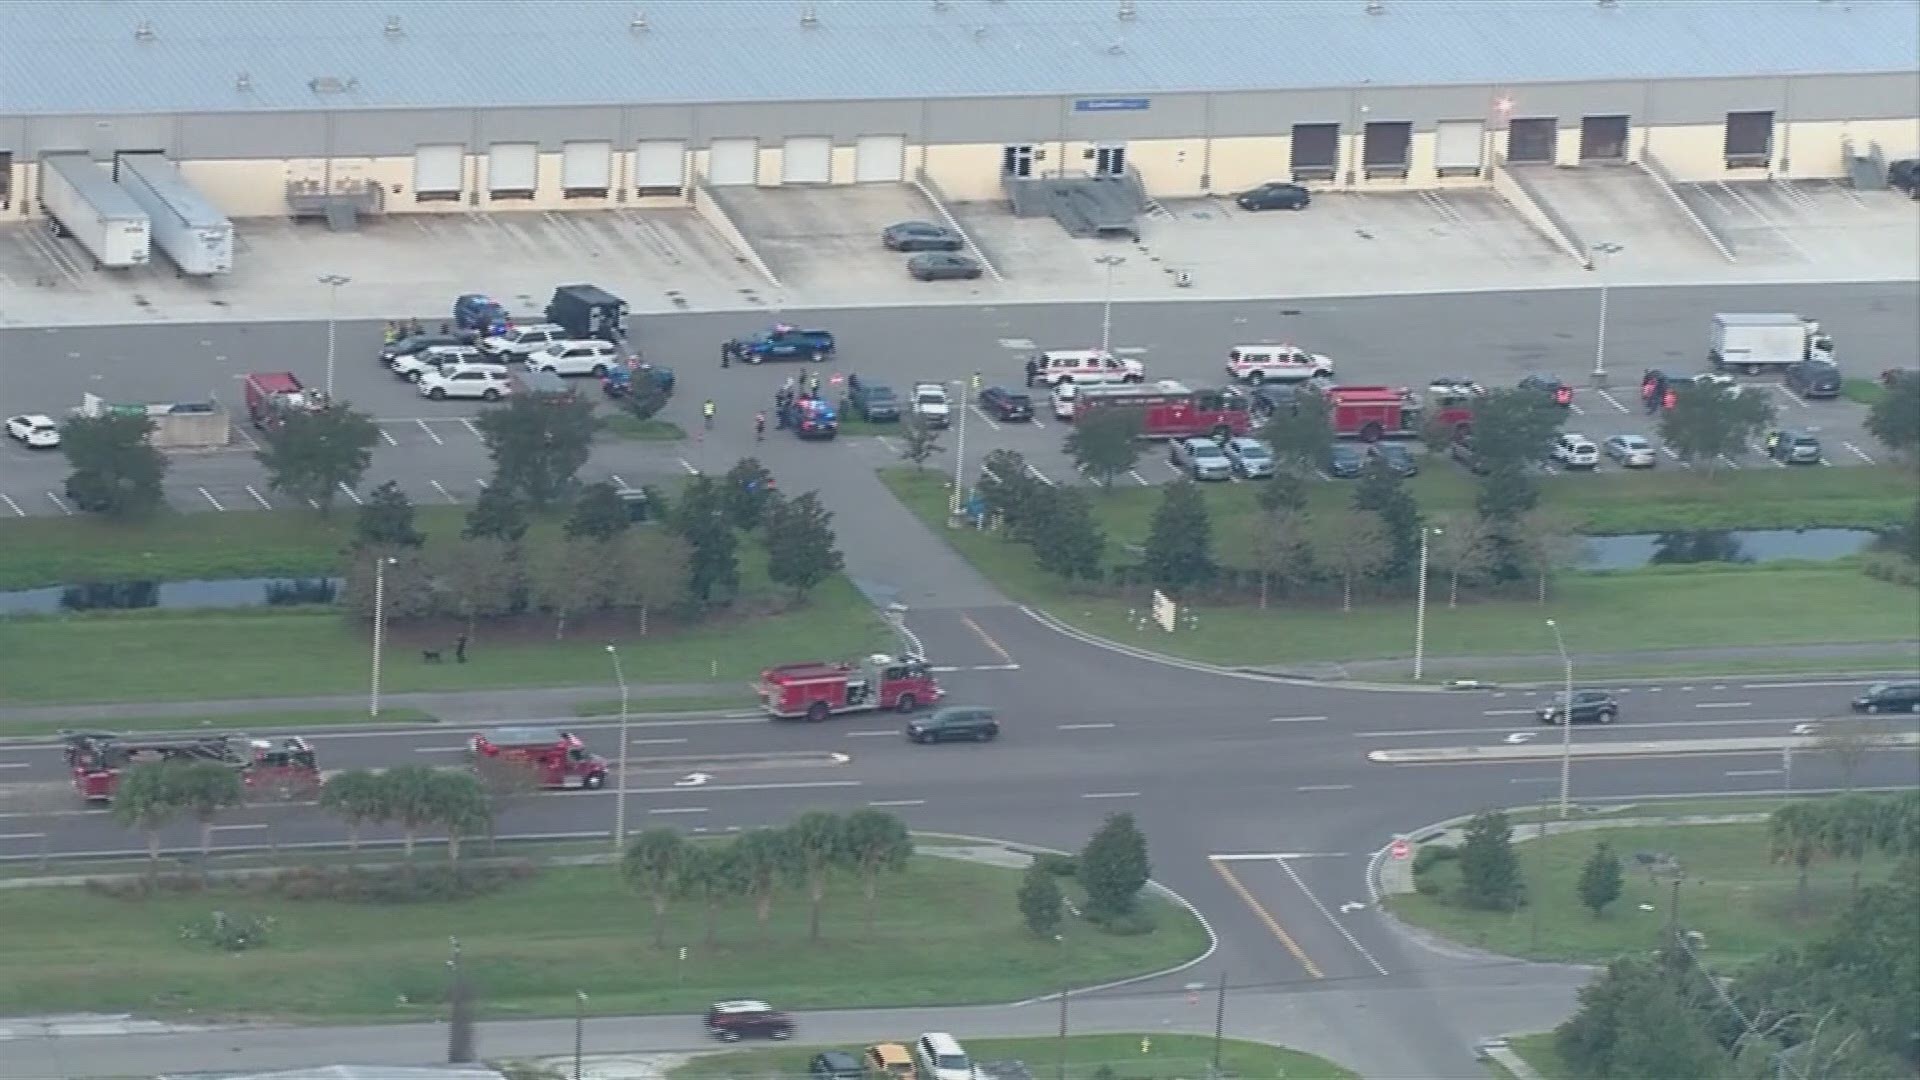 Law enforcement say a suspicious package was found at a cargo facility near the airport.